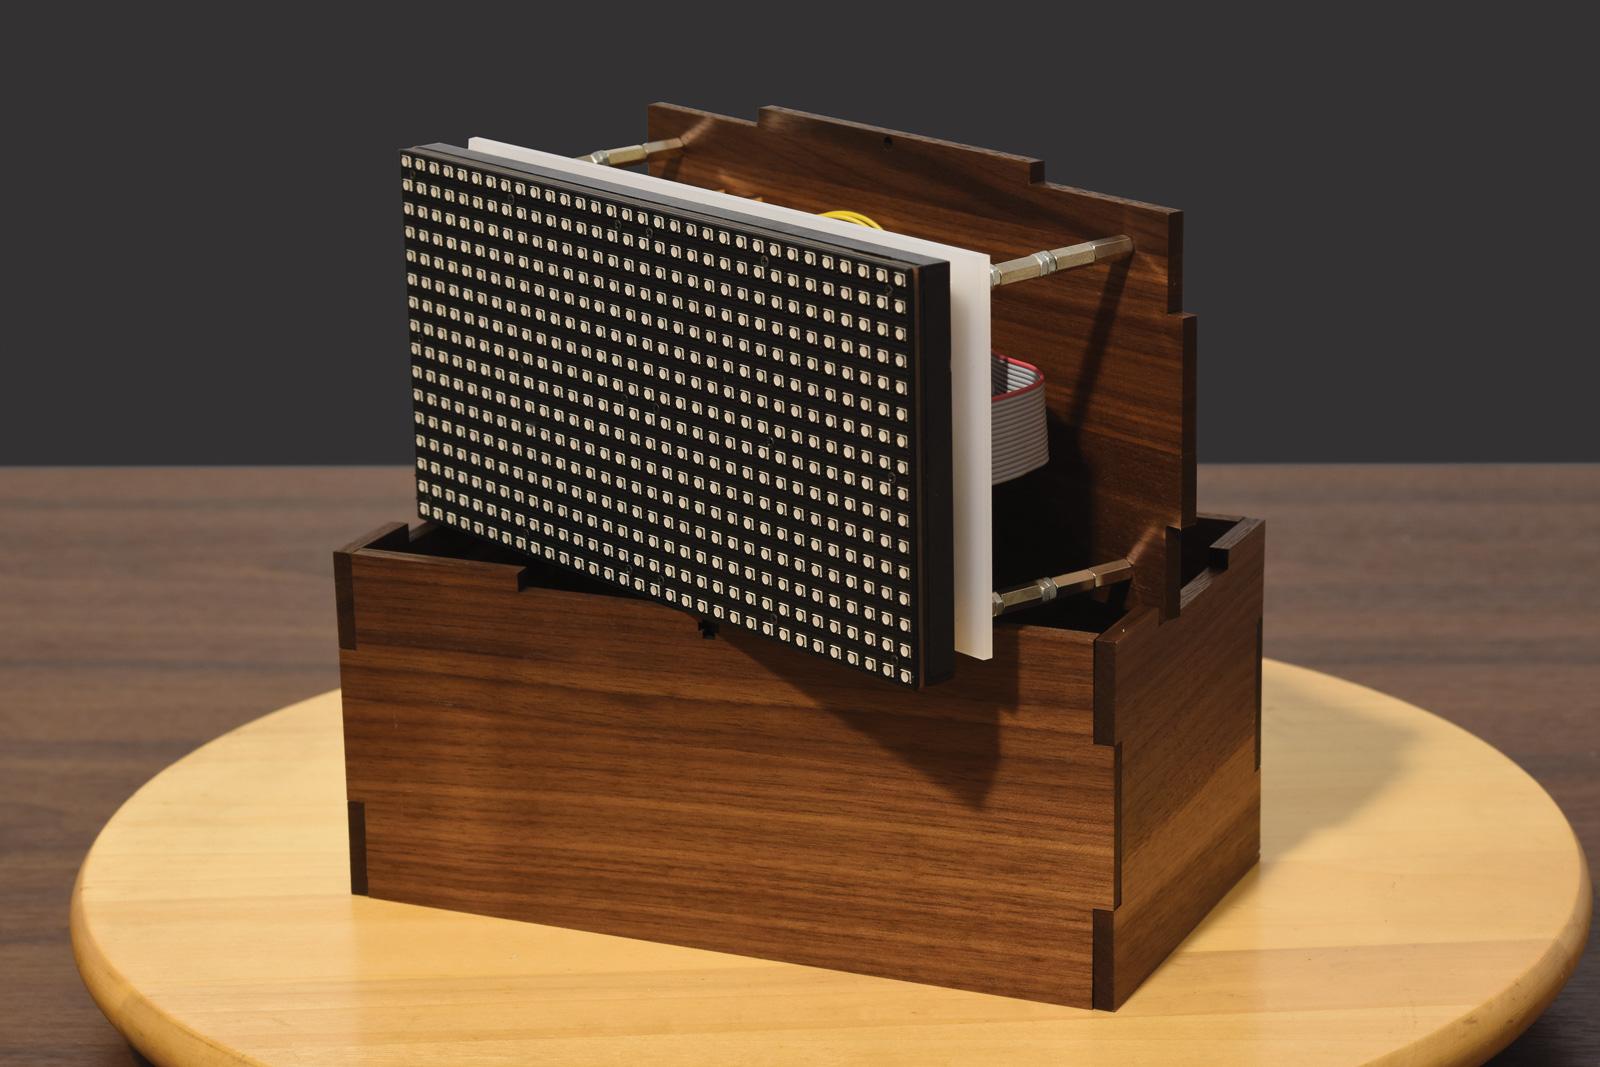 The display and circitry fit neatly within the laser-cut case.